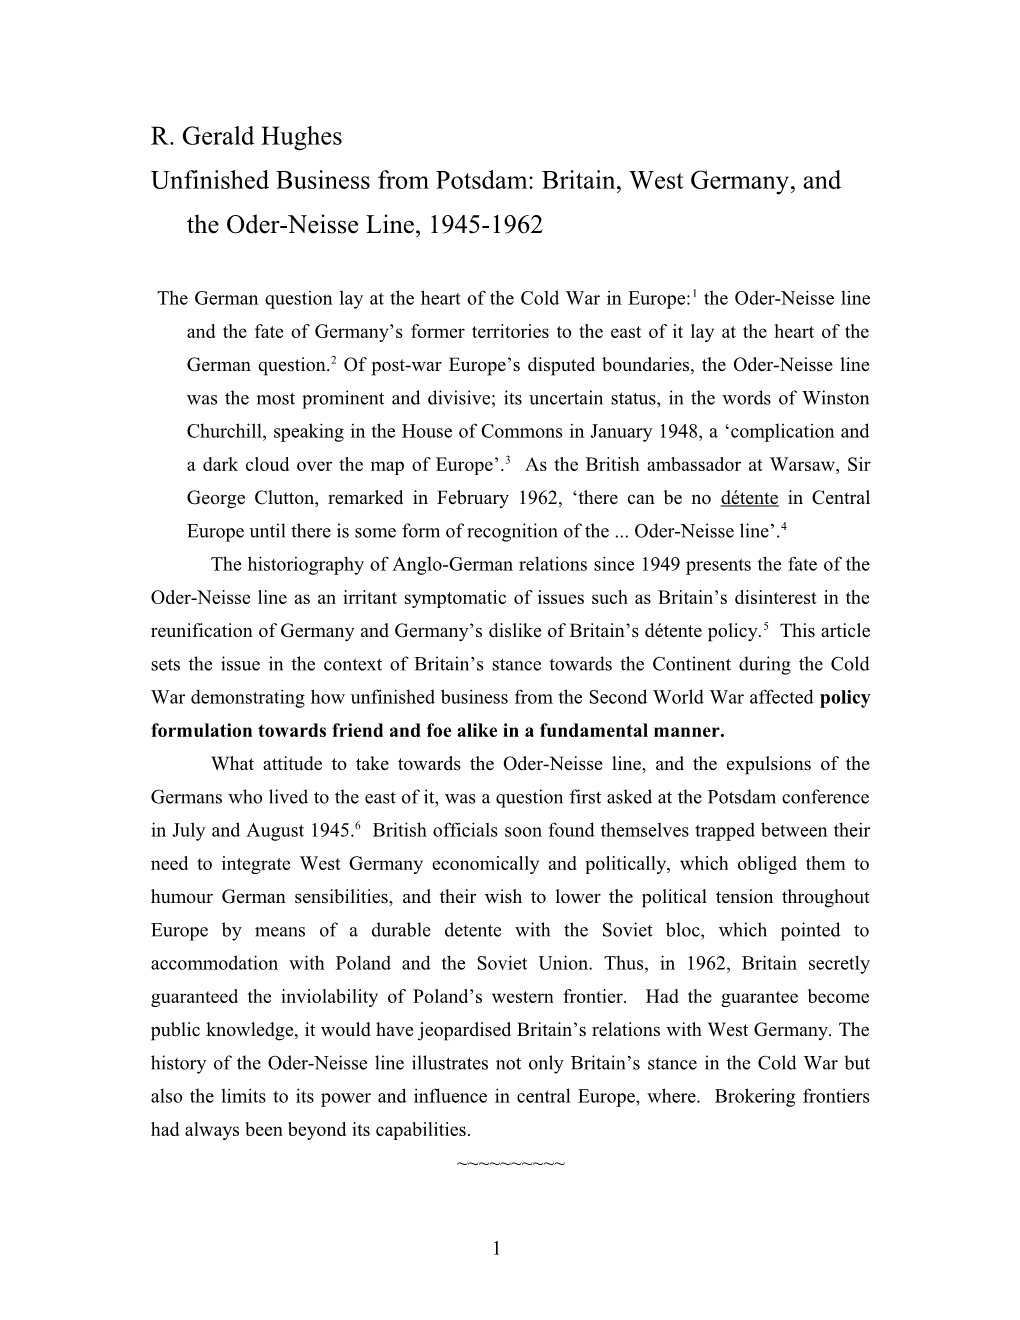 Unfinished Business from Potsdam: Britain, West Germany, and the Oder-Neisse Line, 1945-1962